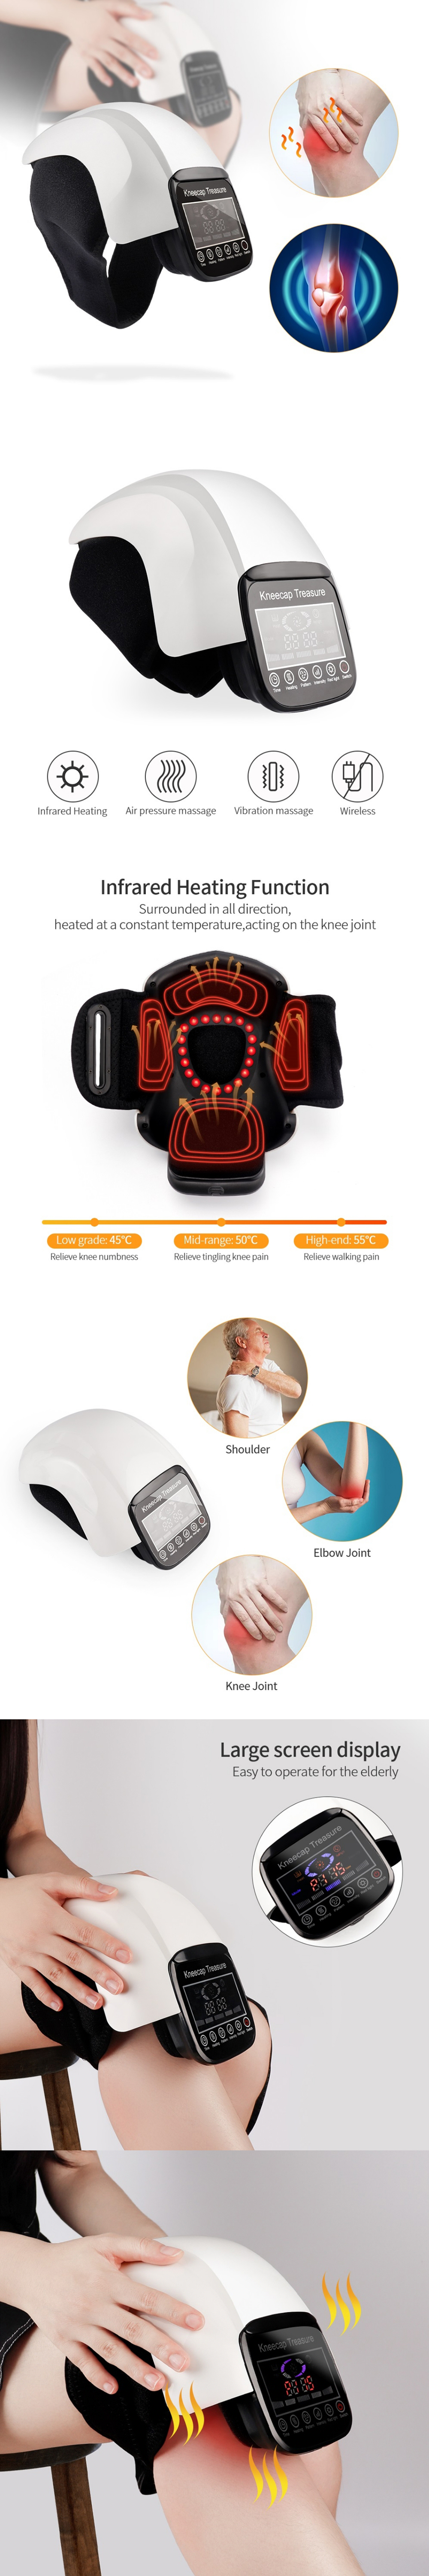 Electric-Infrared-Heating-Knee-Massager-LCD-Display-Air-Pressure-Vibration-Physiotherapy-Instrument--1913137-1